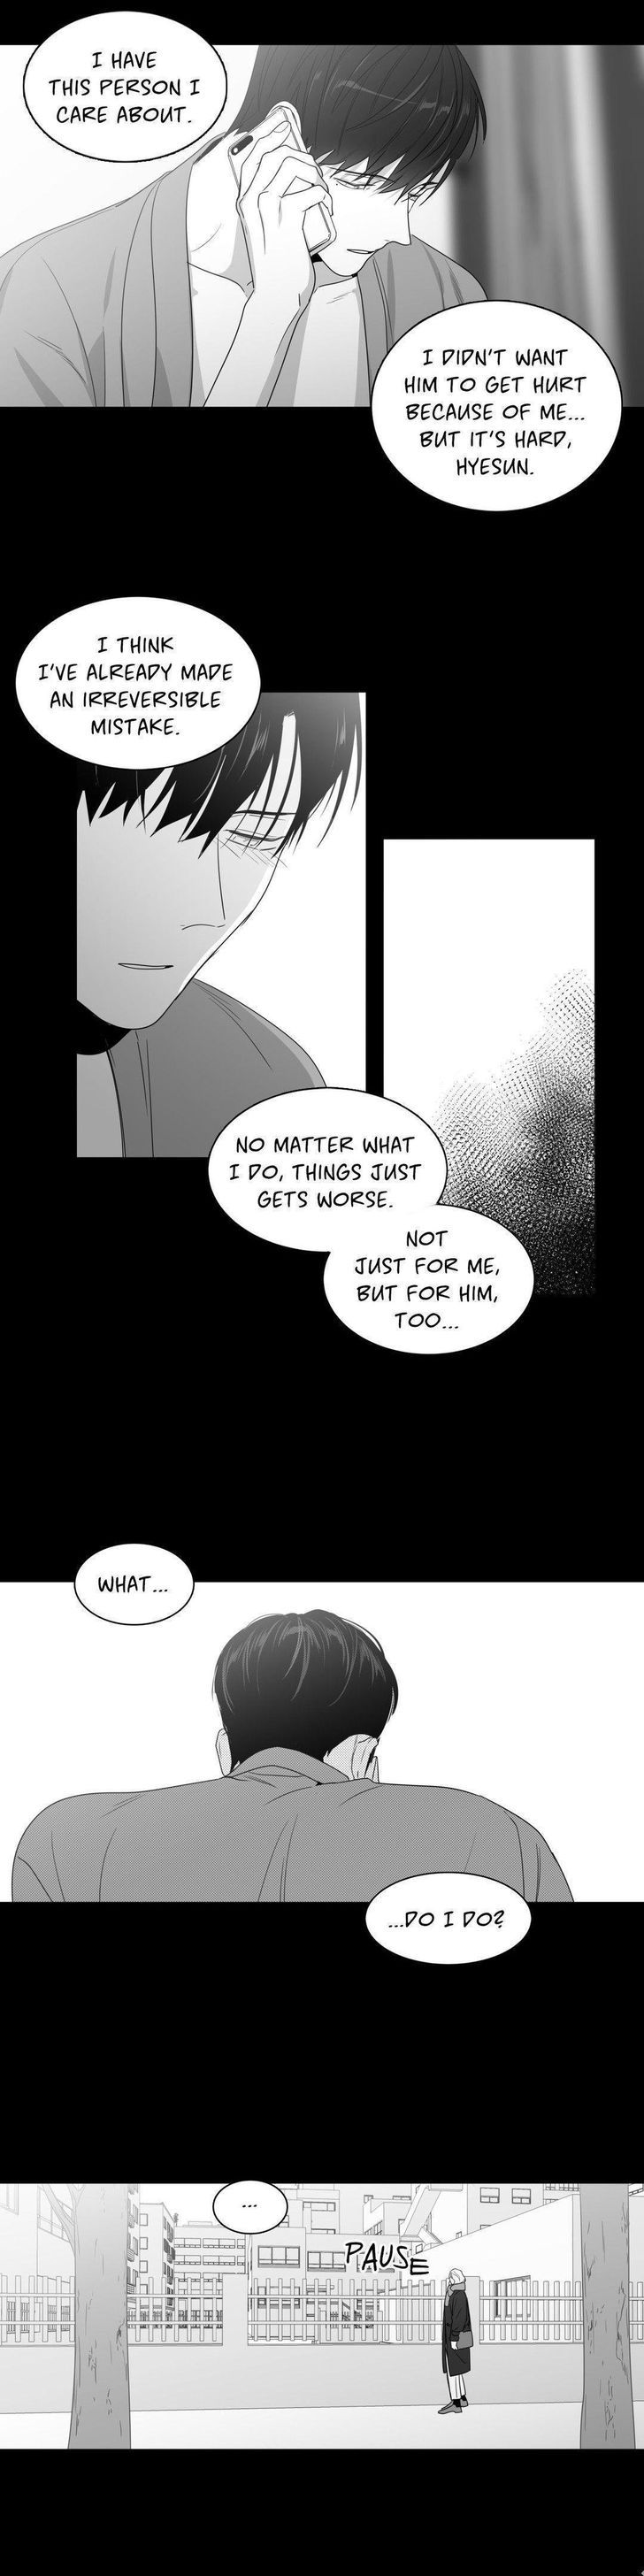 Lover Boy (Lezhin) Chapter 064 page 2